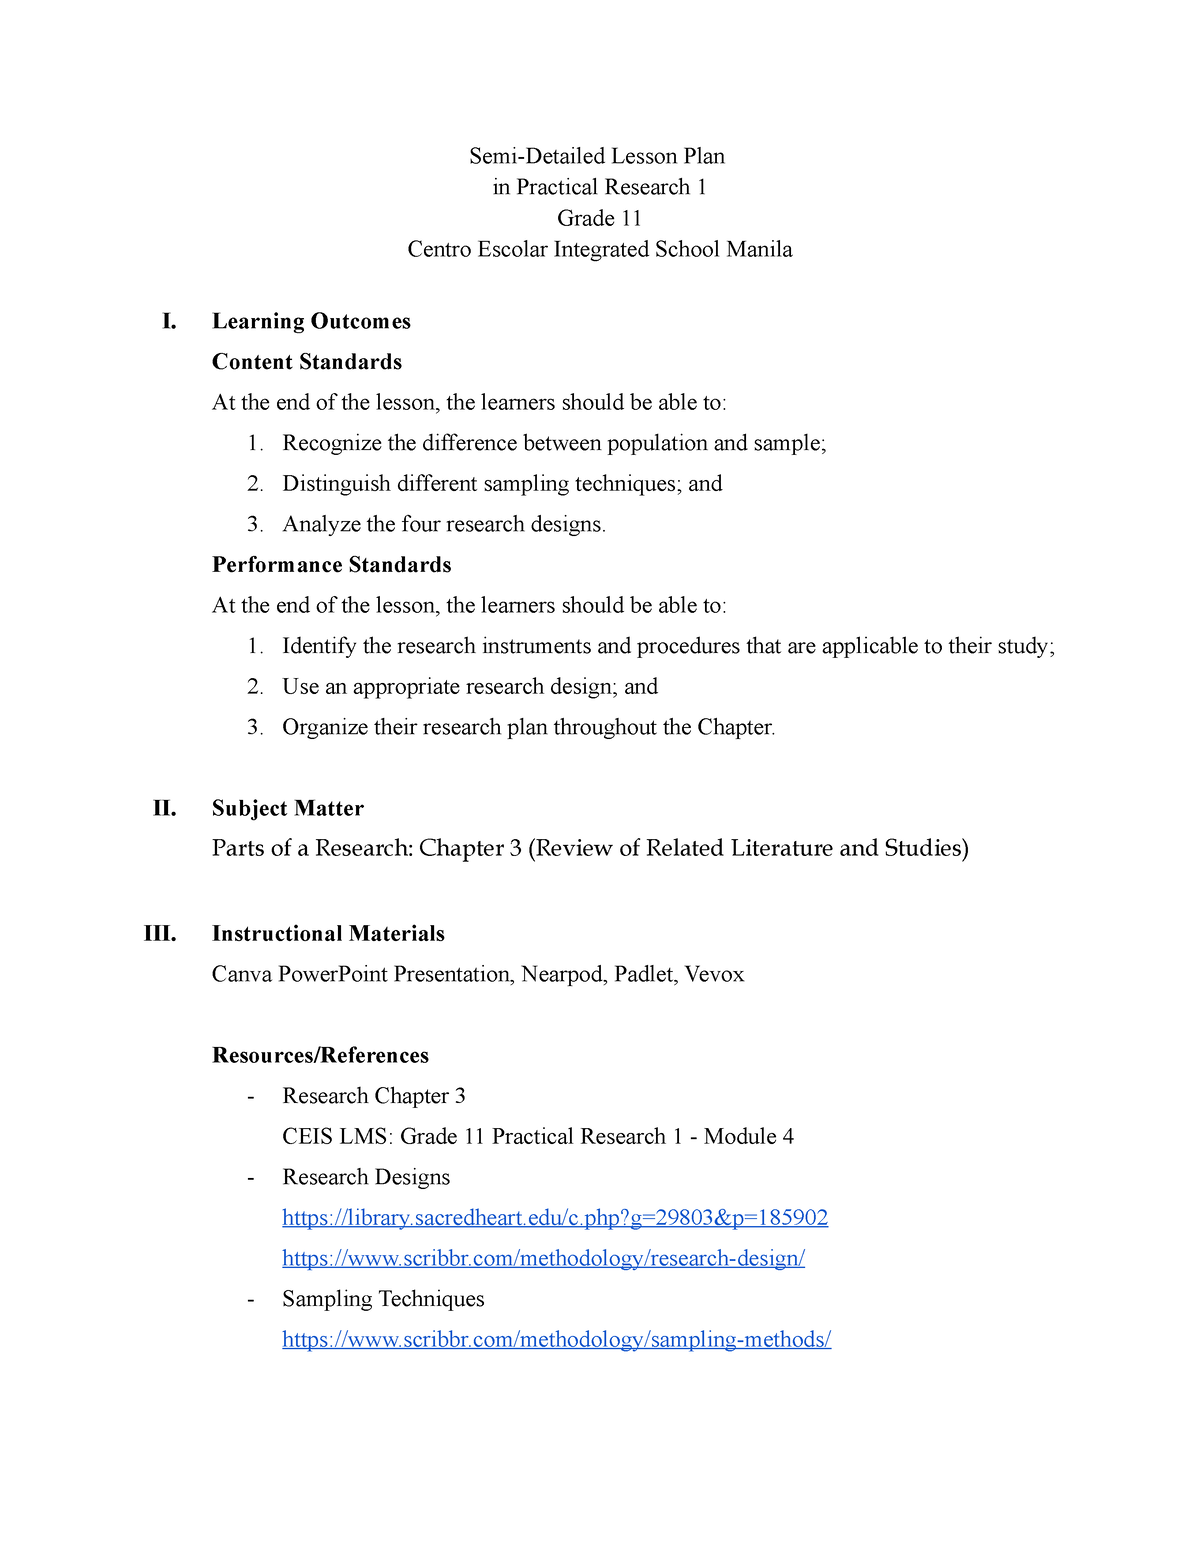 lesson-plan-grade-11-research-chapter-3-semi-detailed-lesson-plan